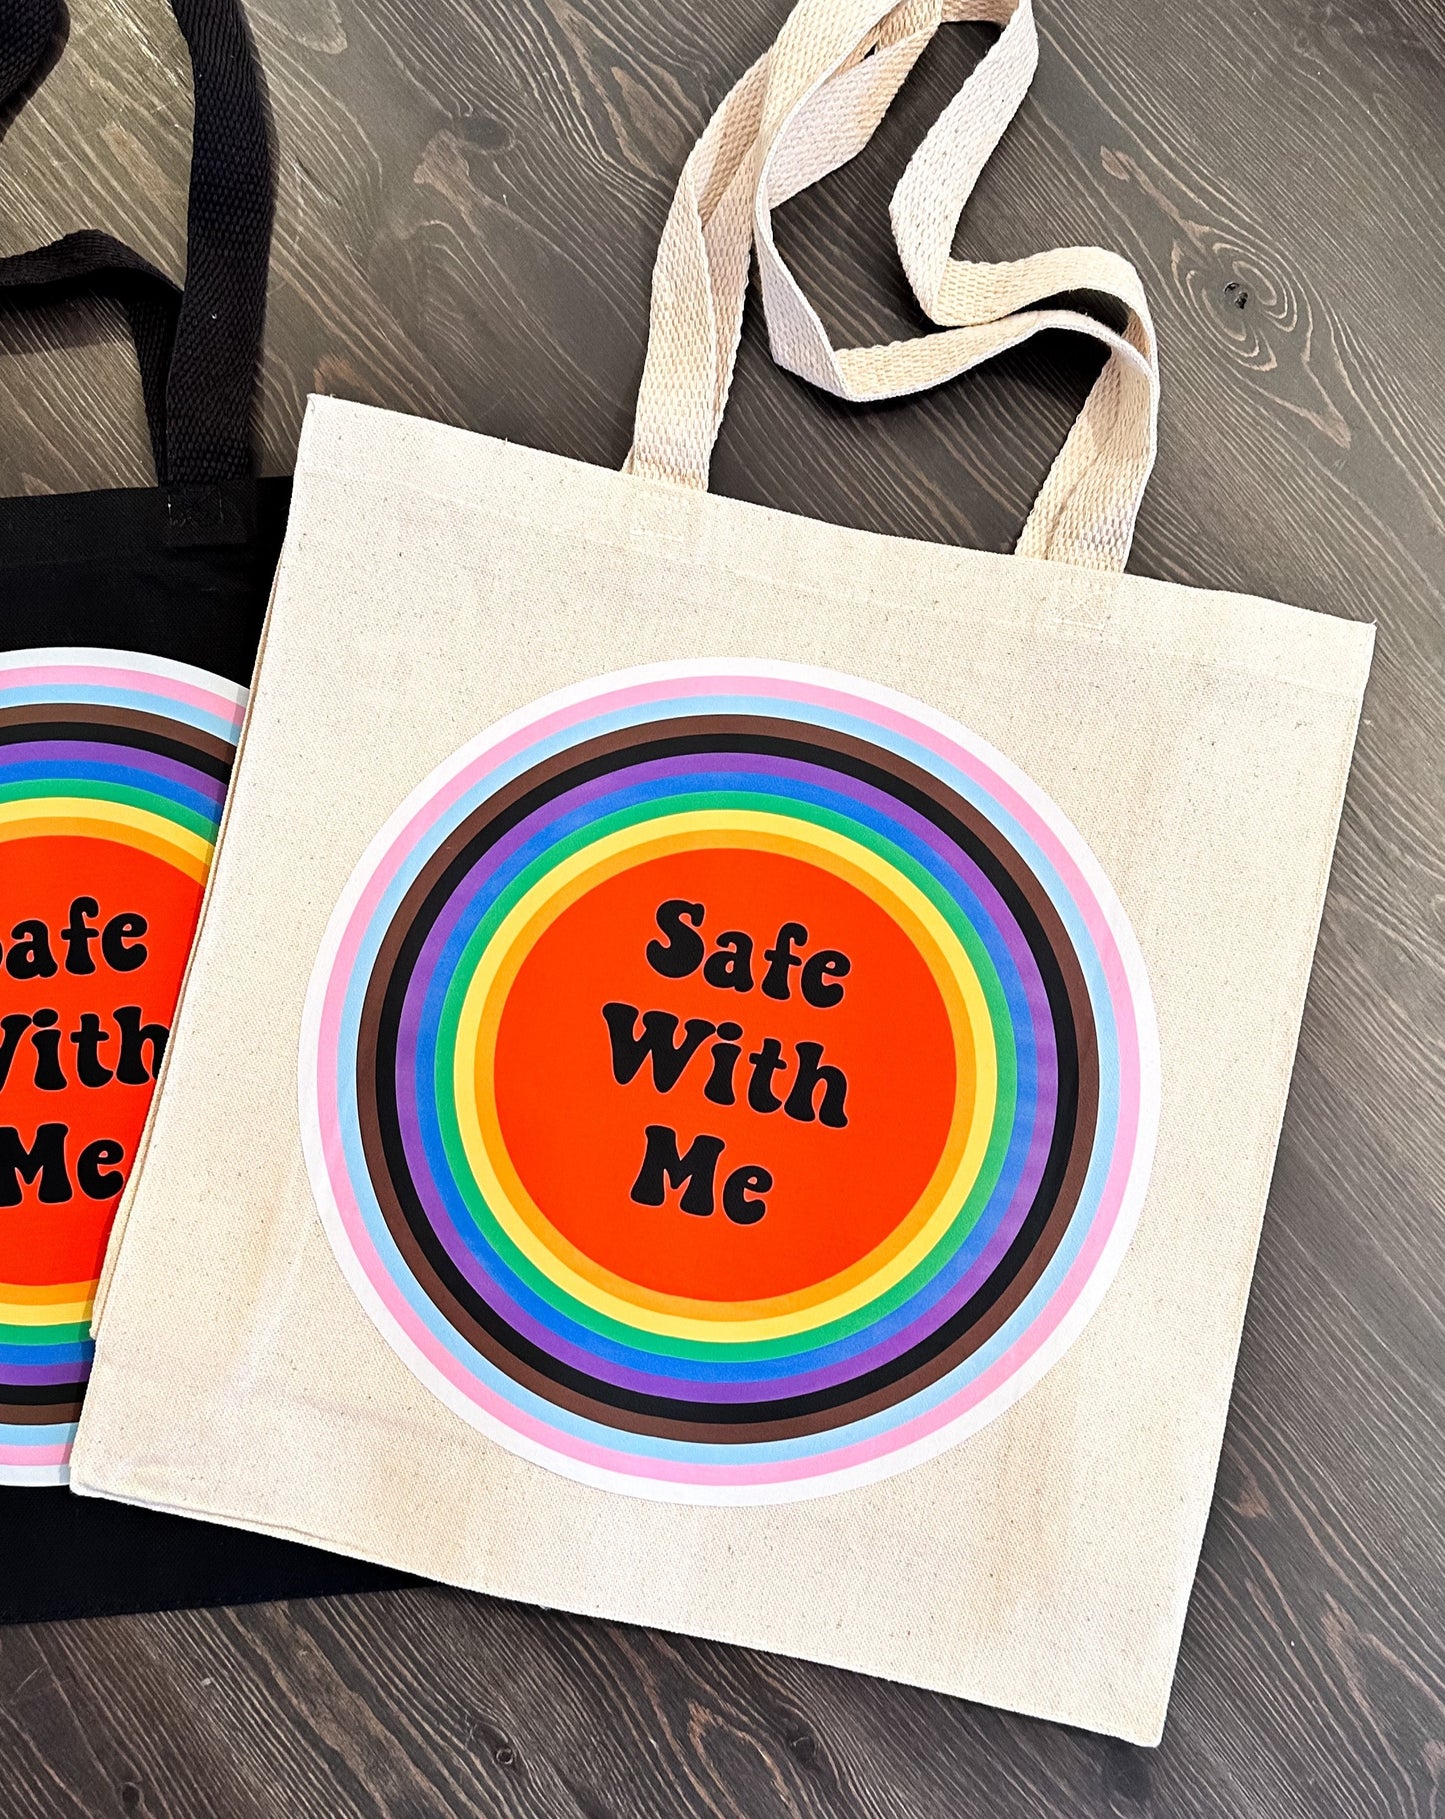 Safe With Me Circle Canvas Tote Bag